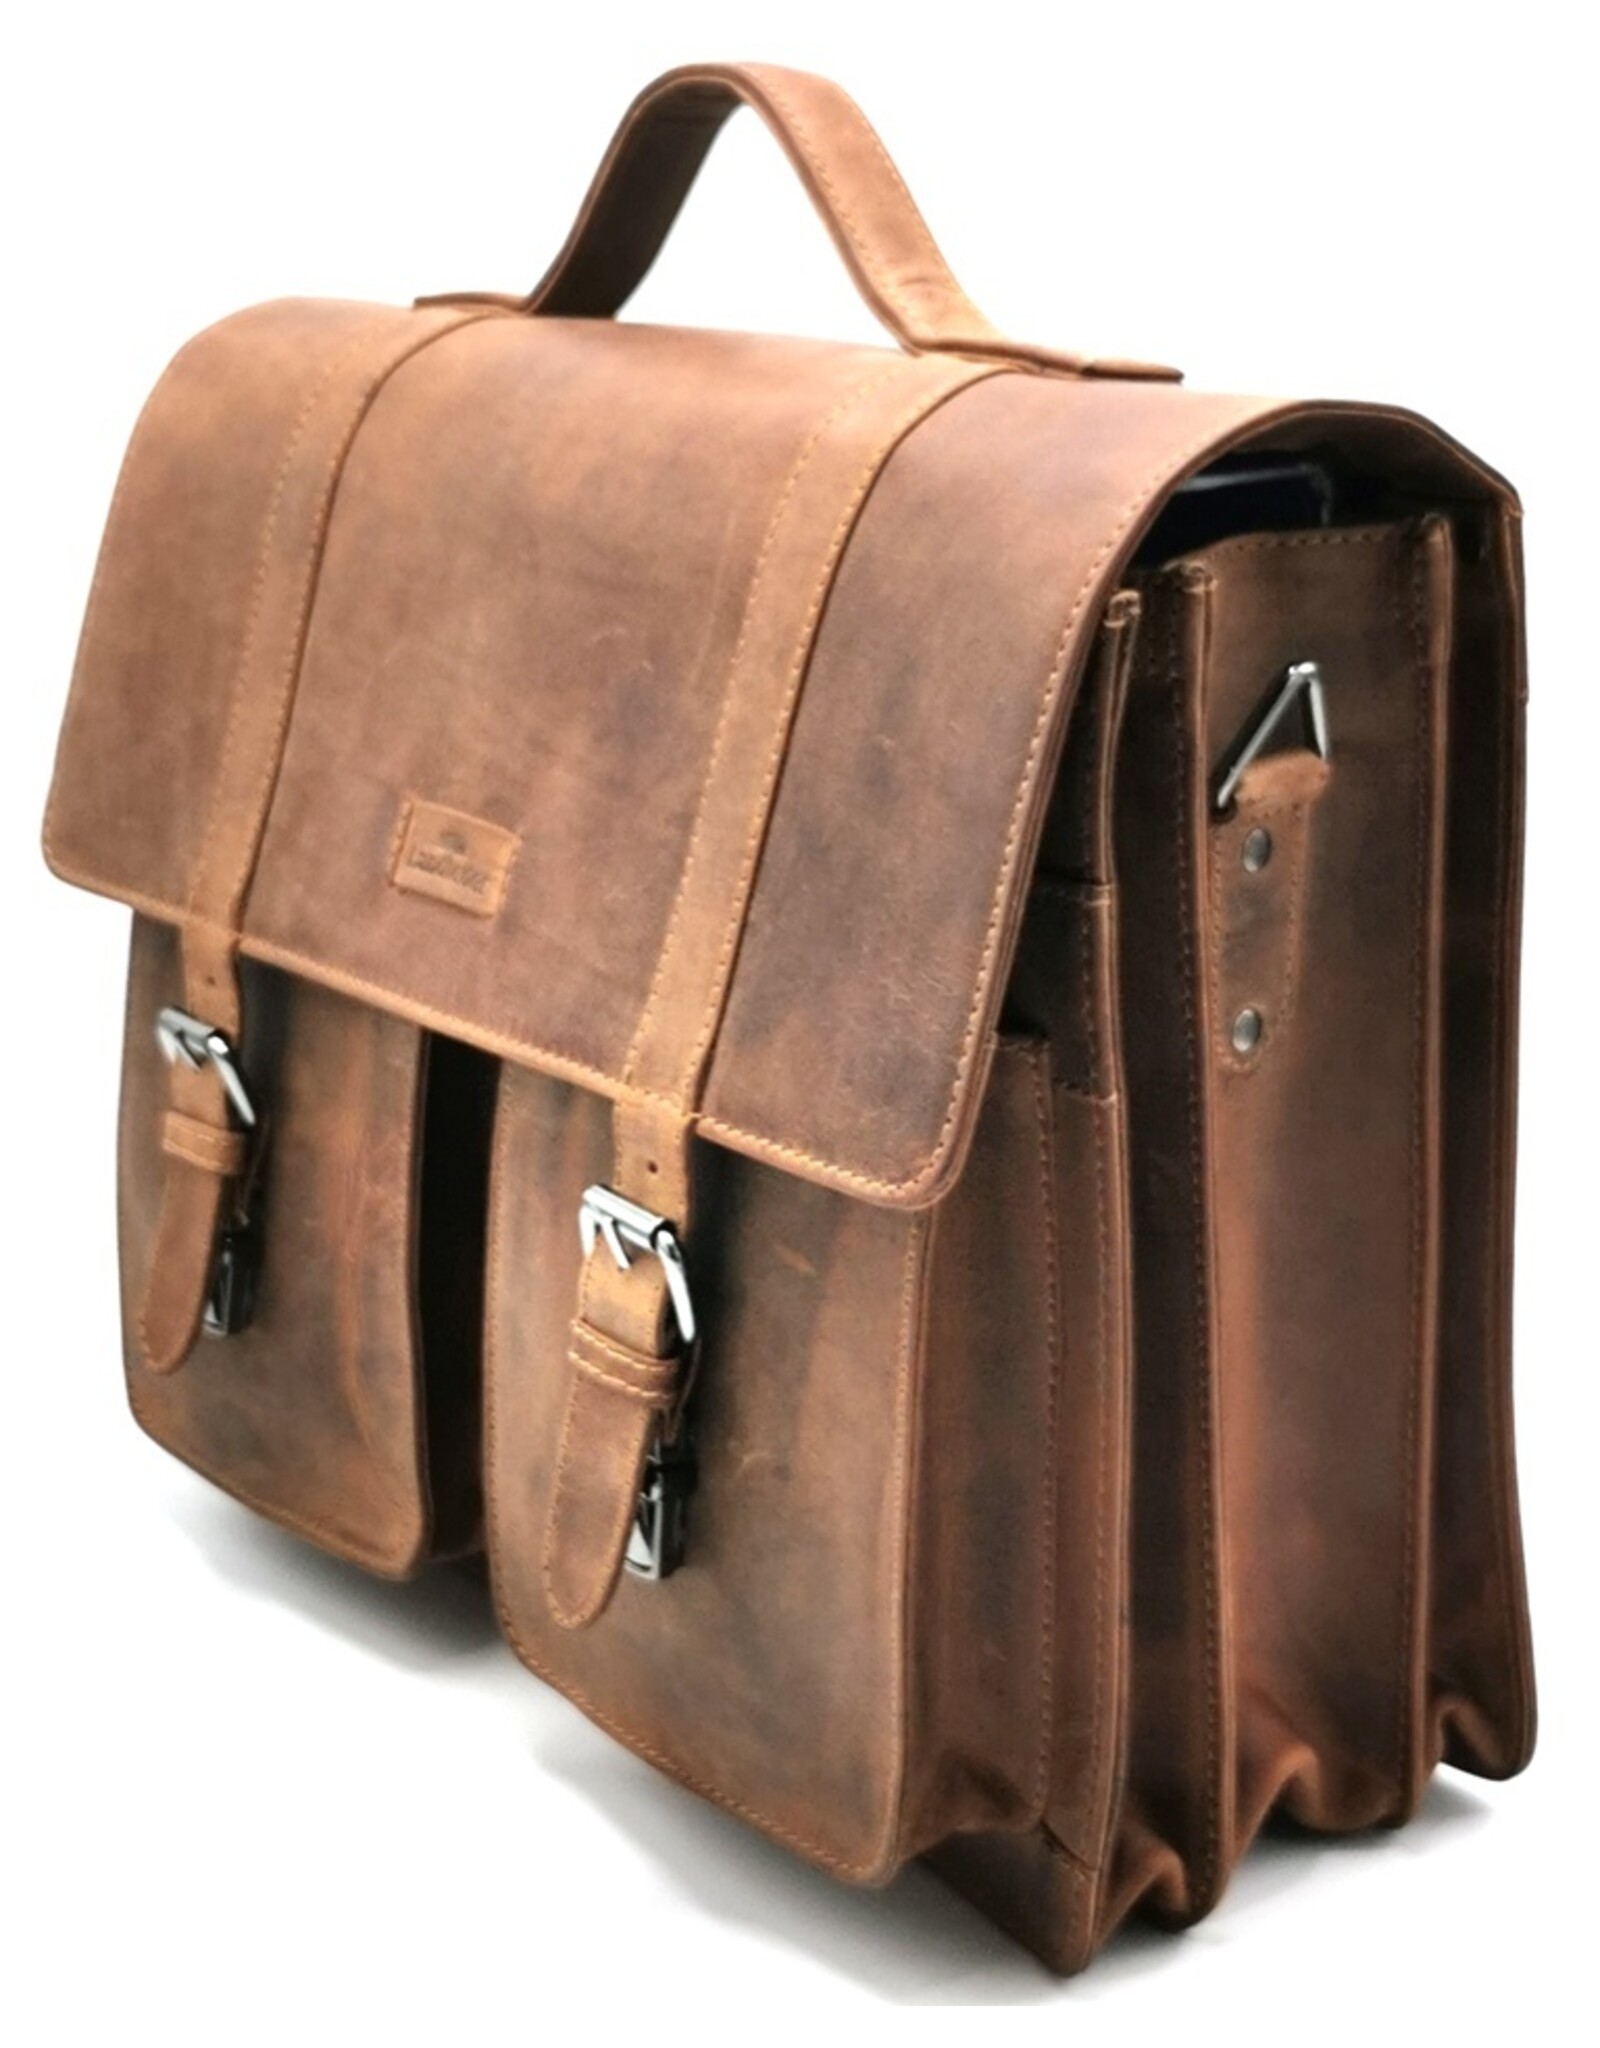 LandLeder Leather bags and Leather laptop bags - Briefcase OLD SCHOOL Vintage Leather